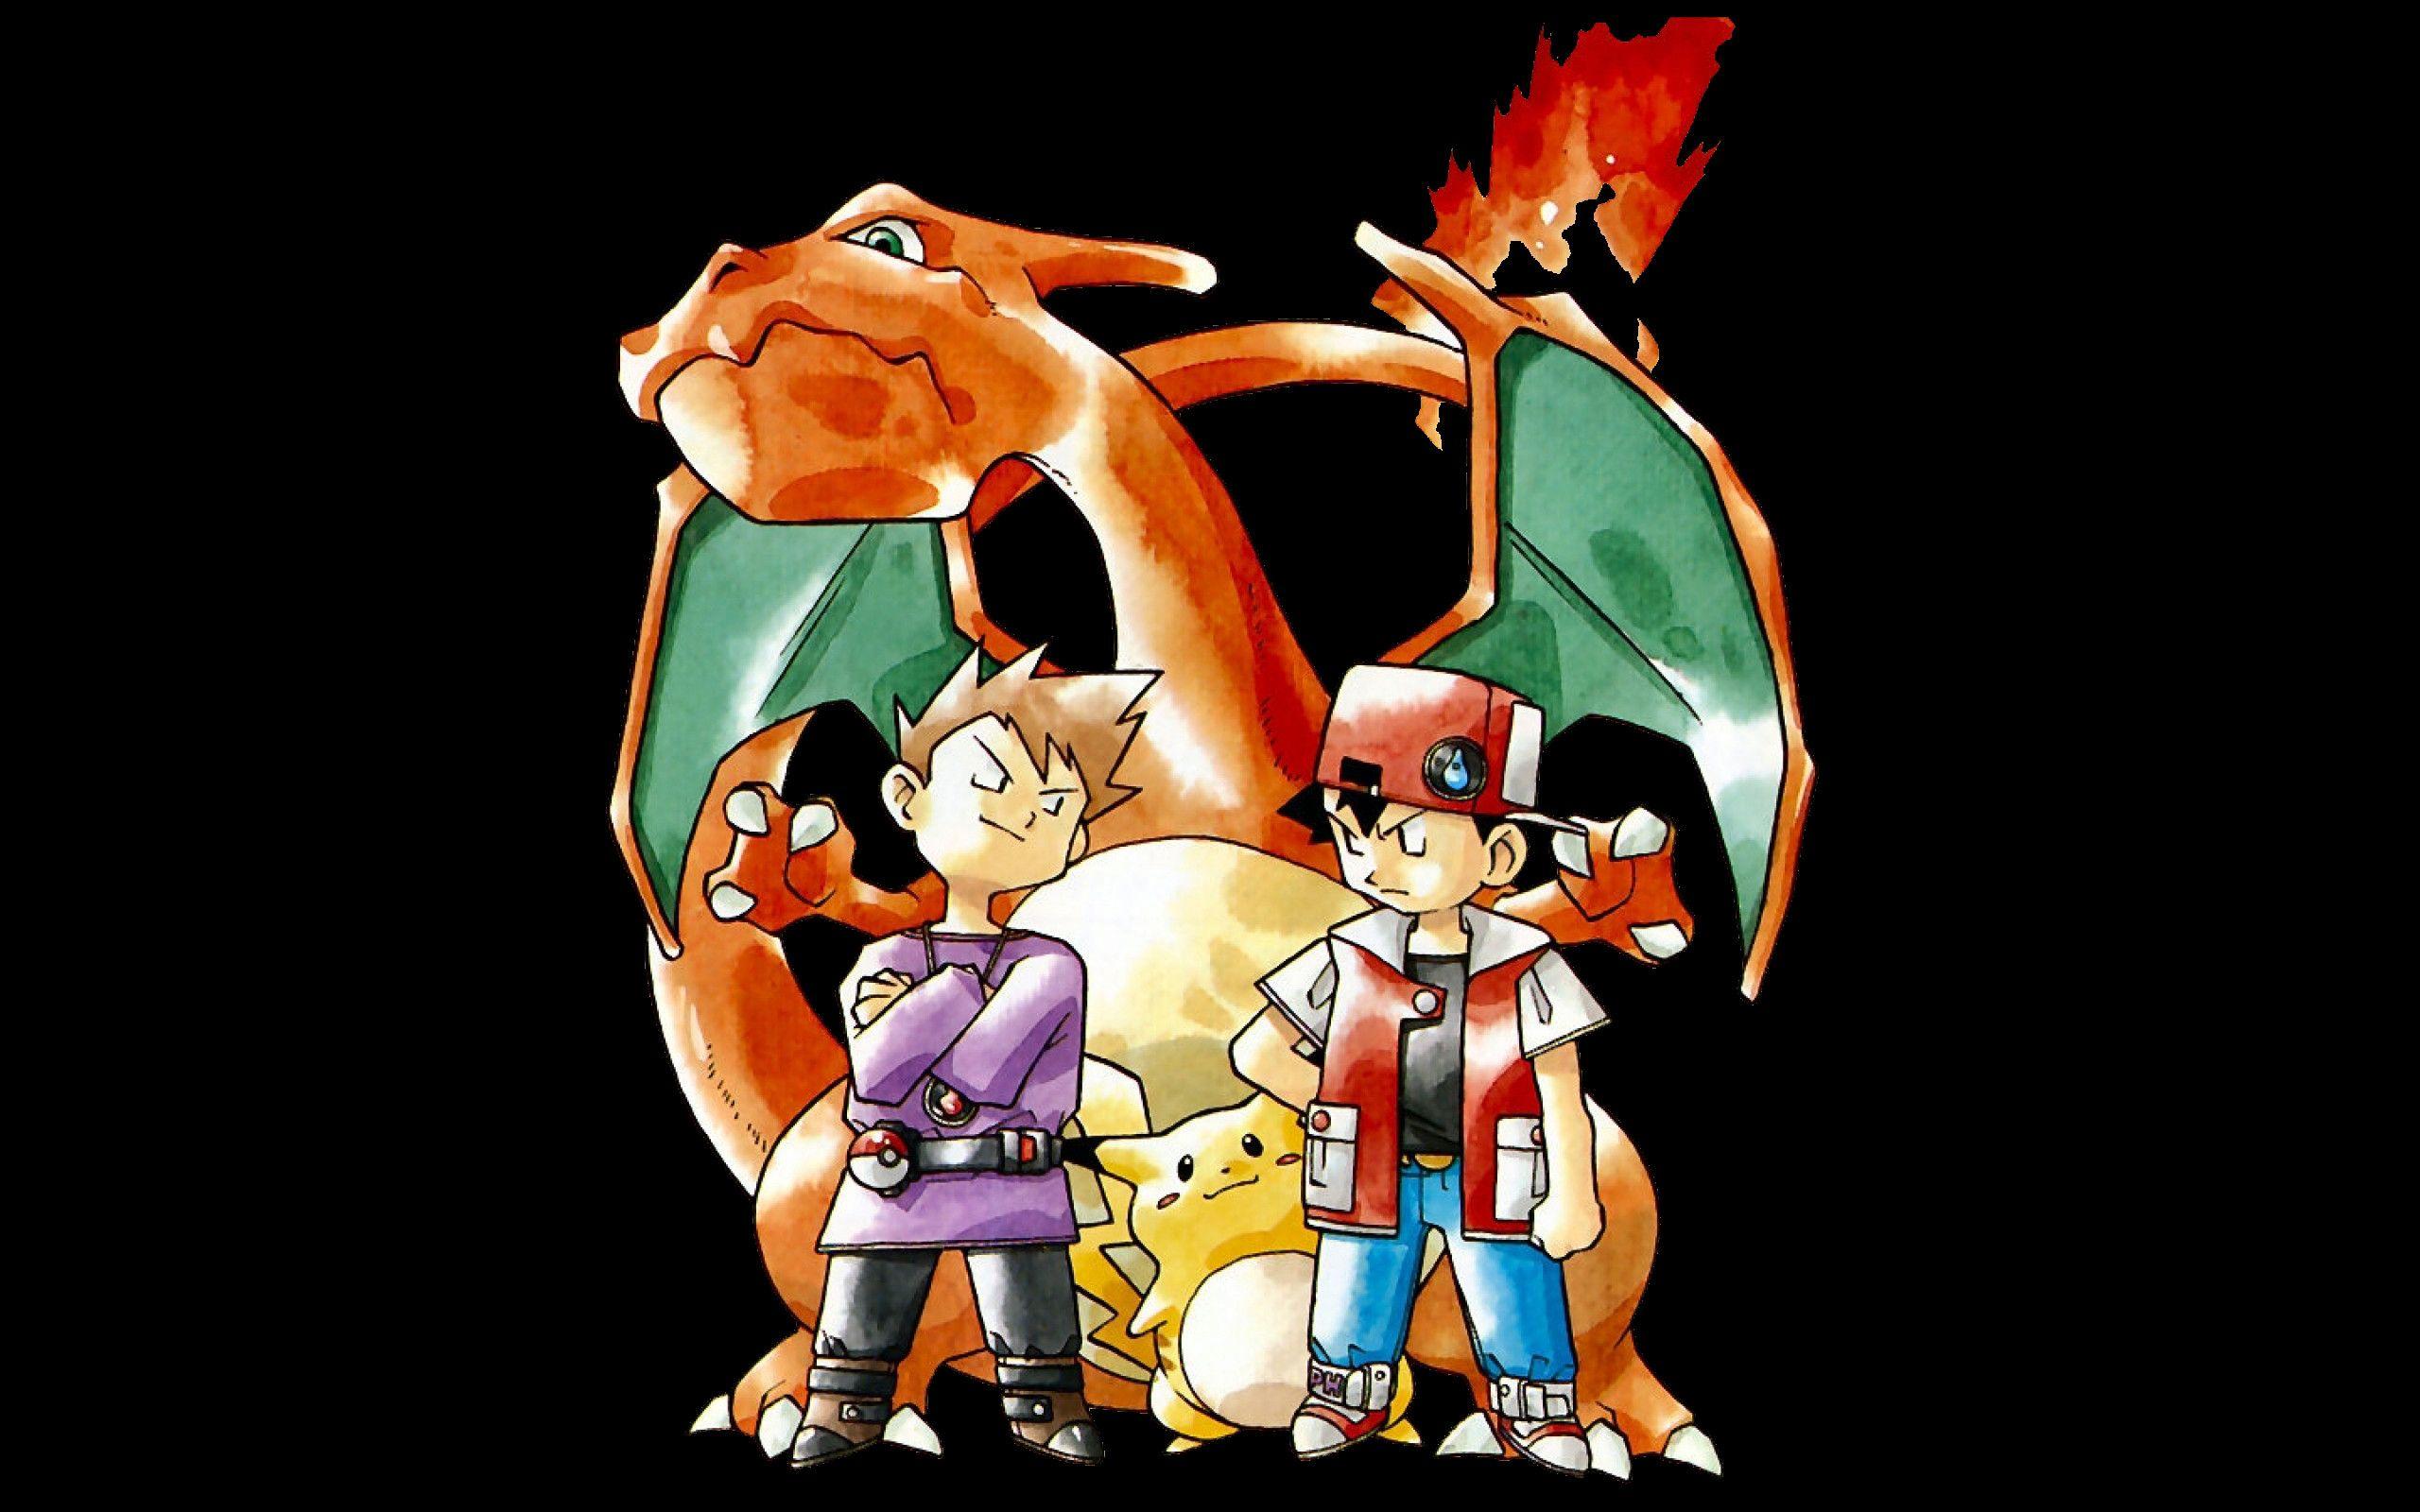 My retro Pokemon Red & Blue wallpaper. Super high resolution. (Also make note of how different Pikachu and Charizard look): pokemon